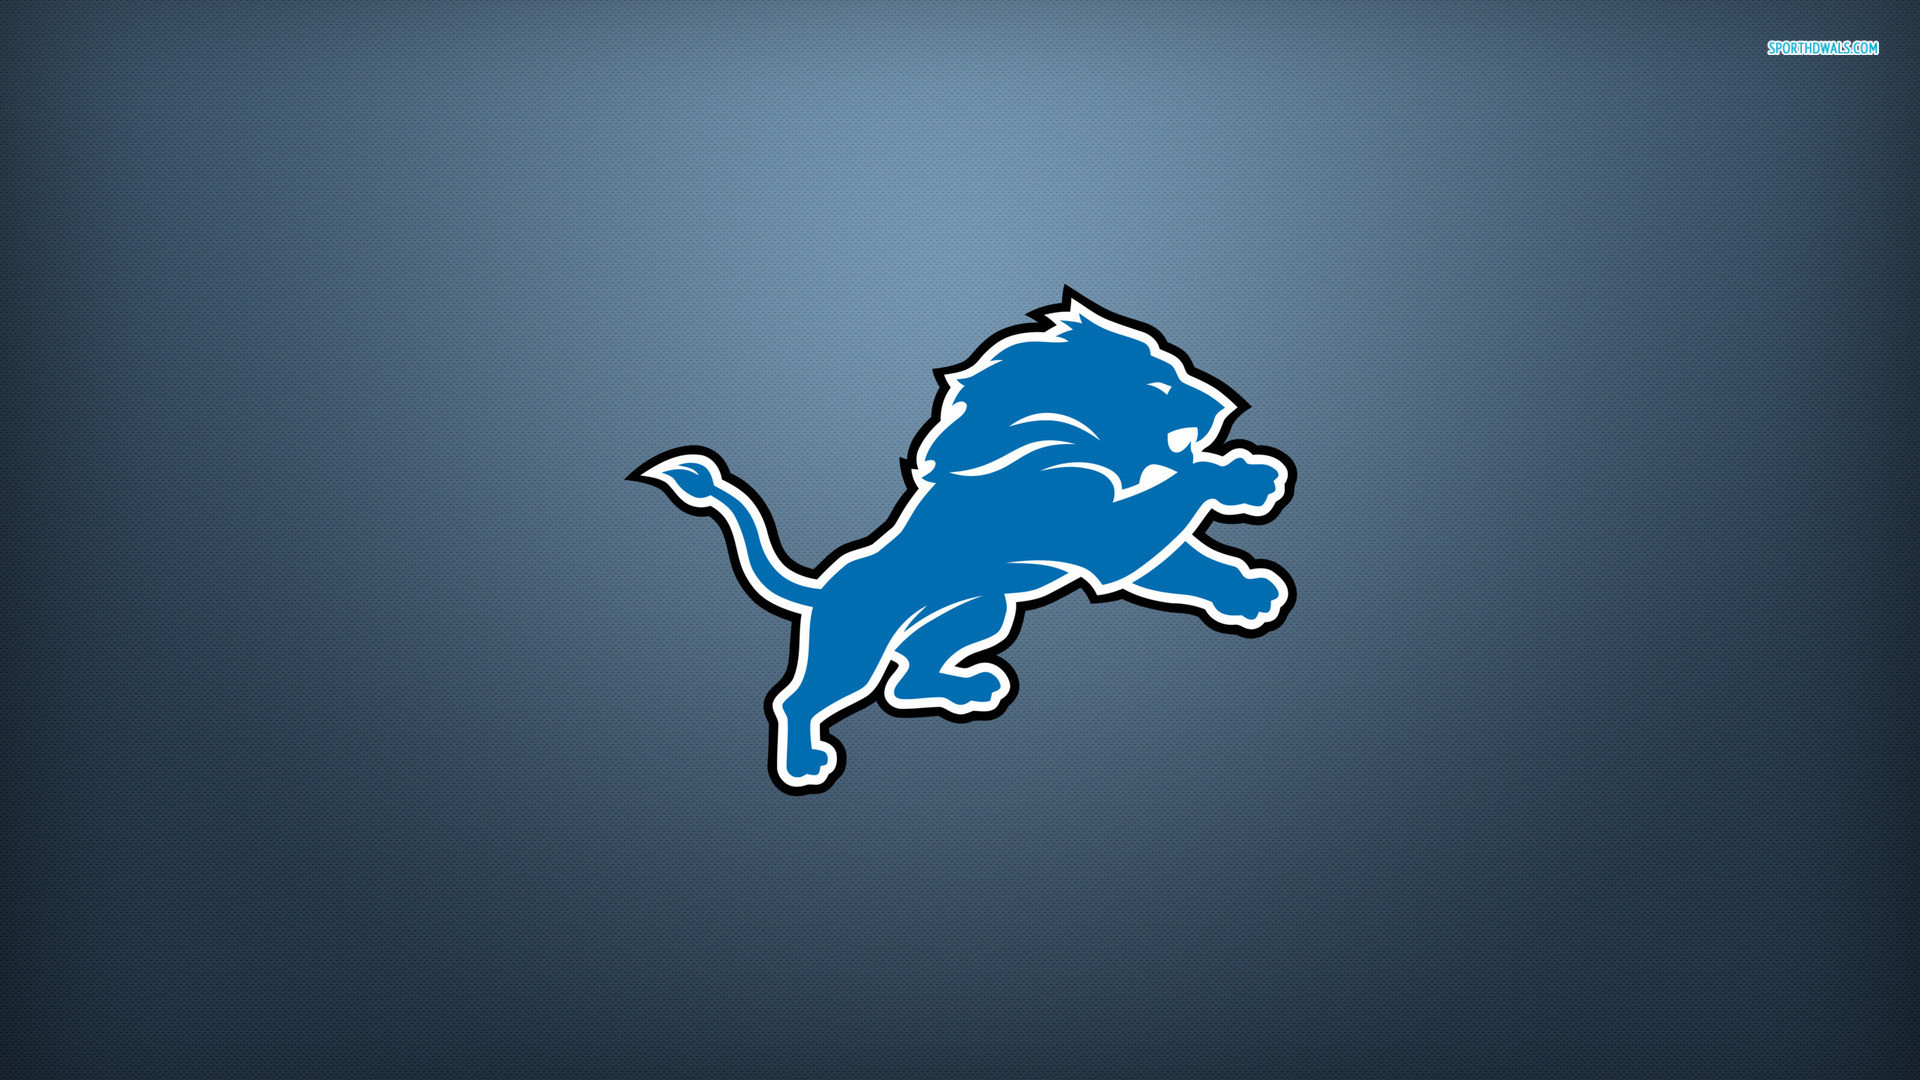 Detroit Lions Wallpapers Relay Wallpaper HD Wallpapers Pinterest Detroit lions wallpaper, Lion wallpaper and Detroit